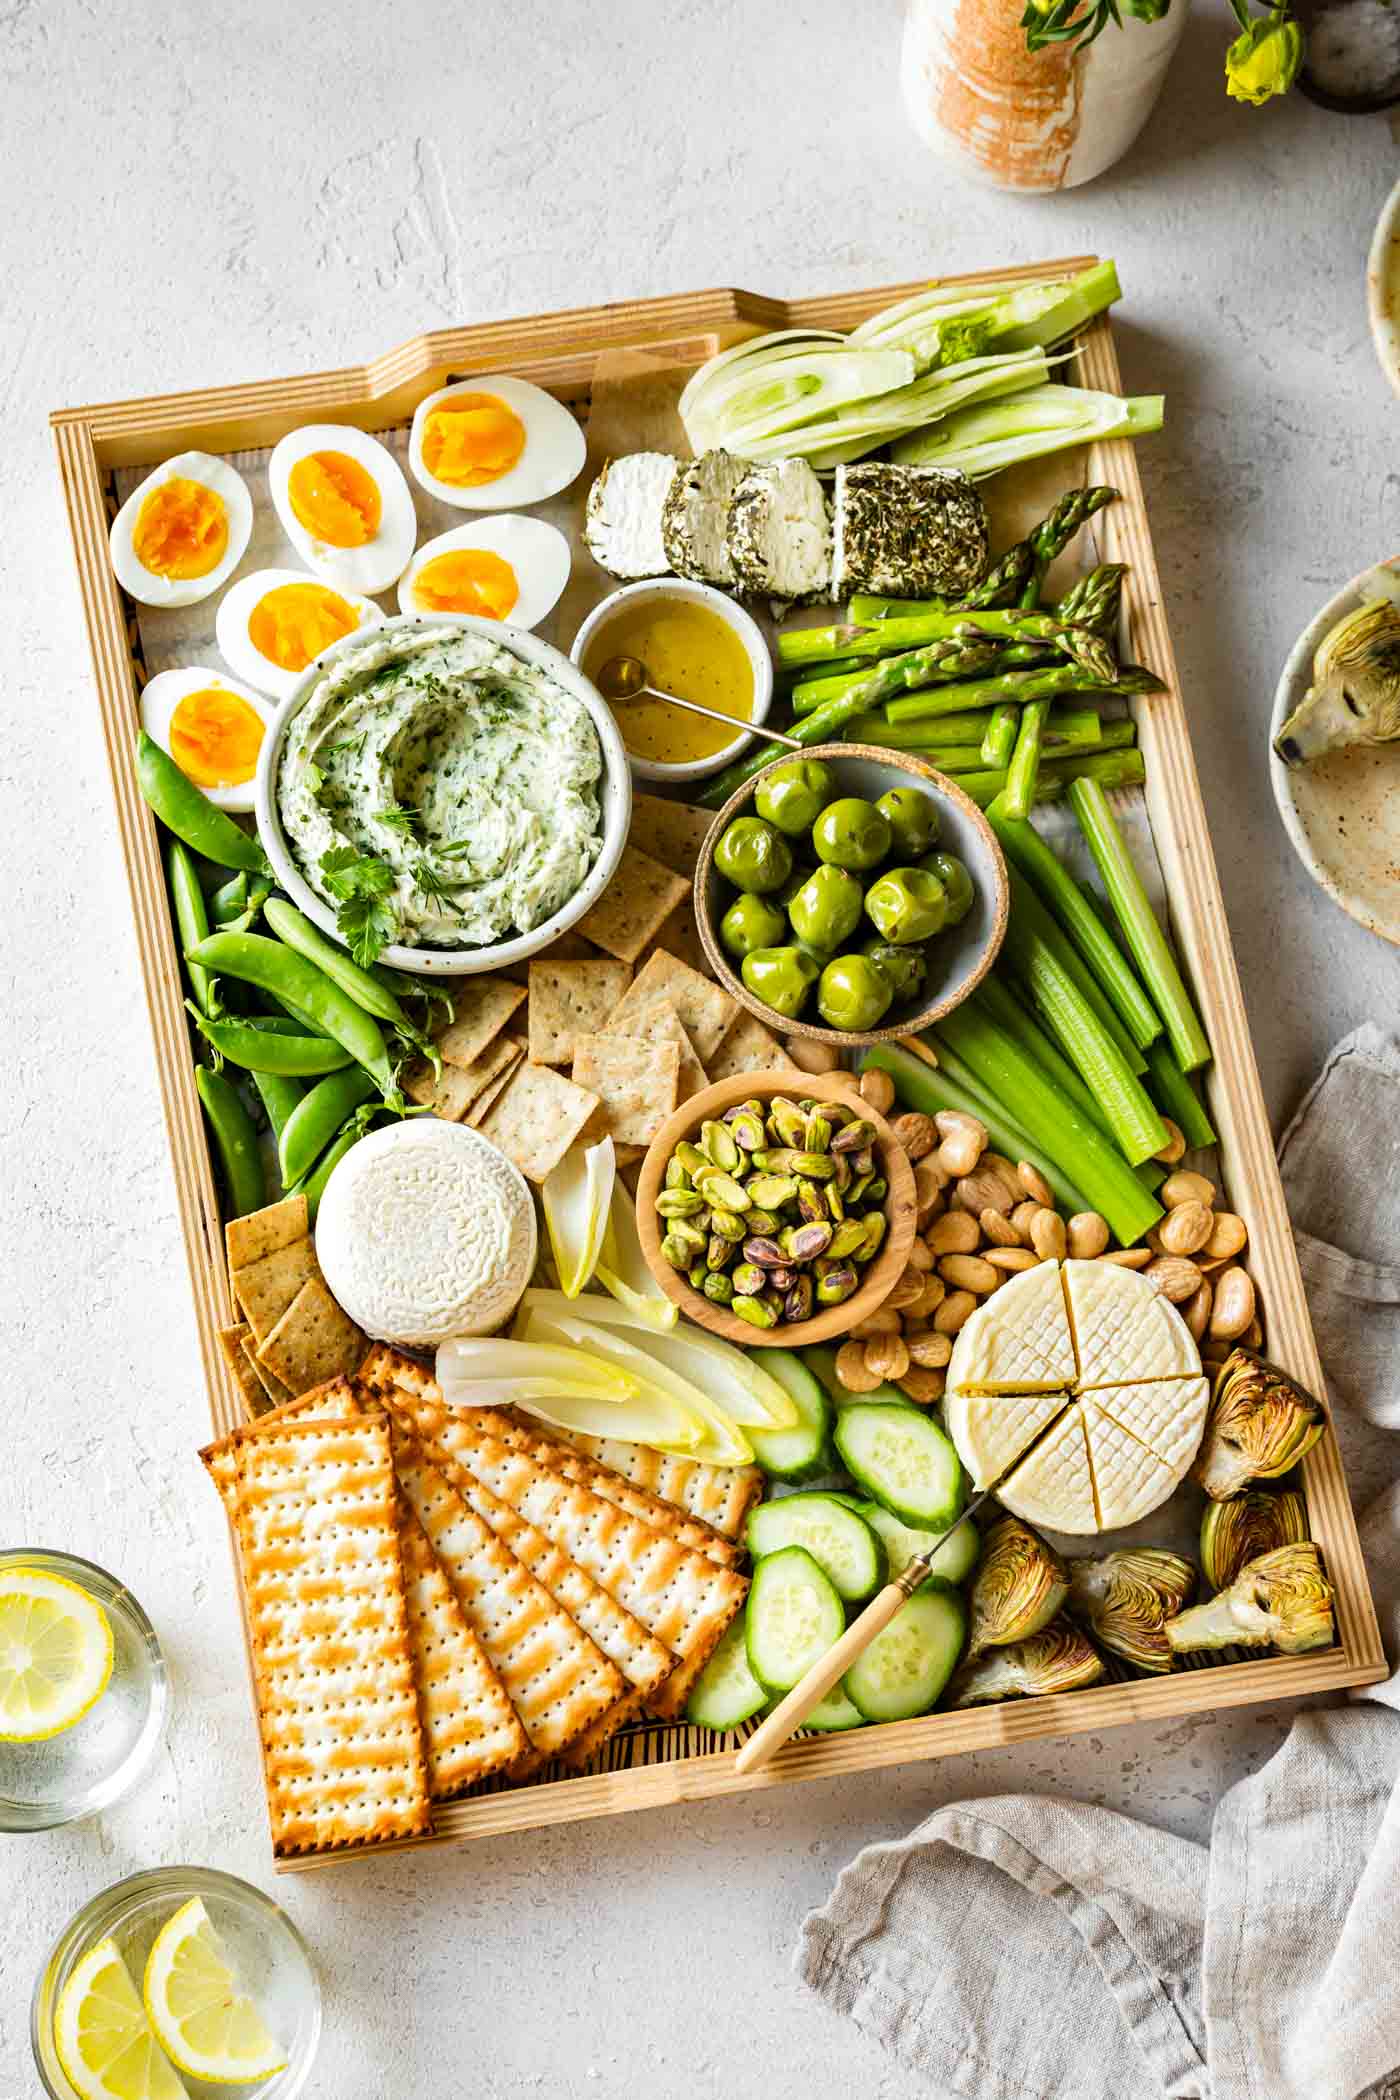 a majestic green cheeseboard features a bowl of herb compound butter